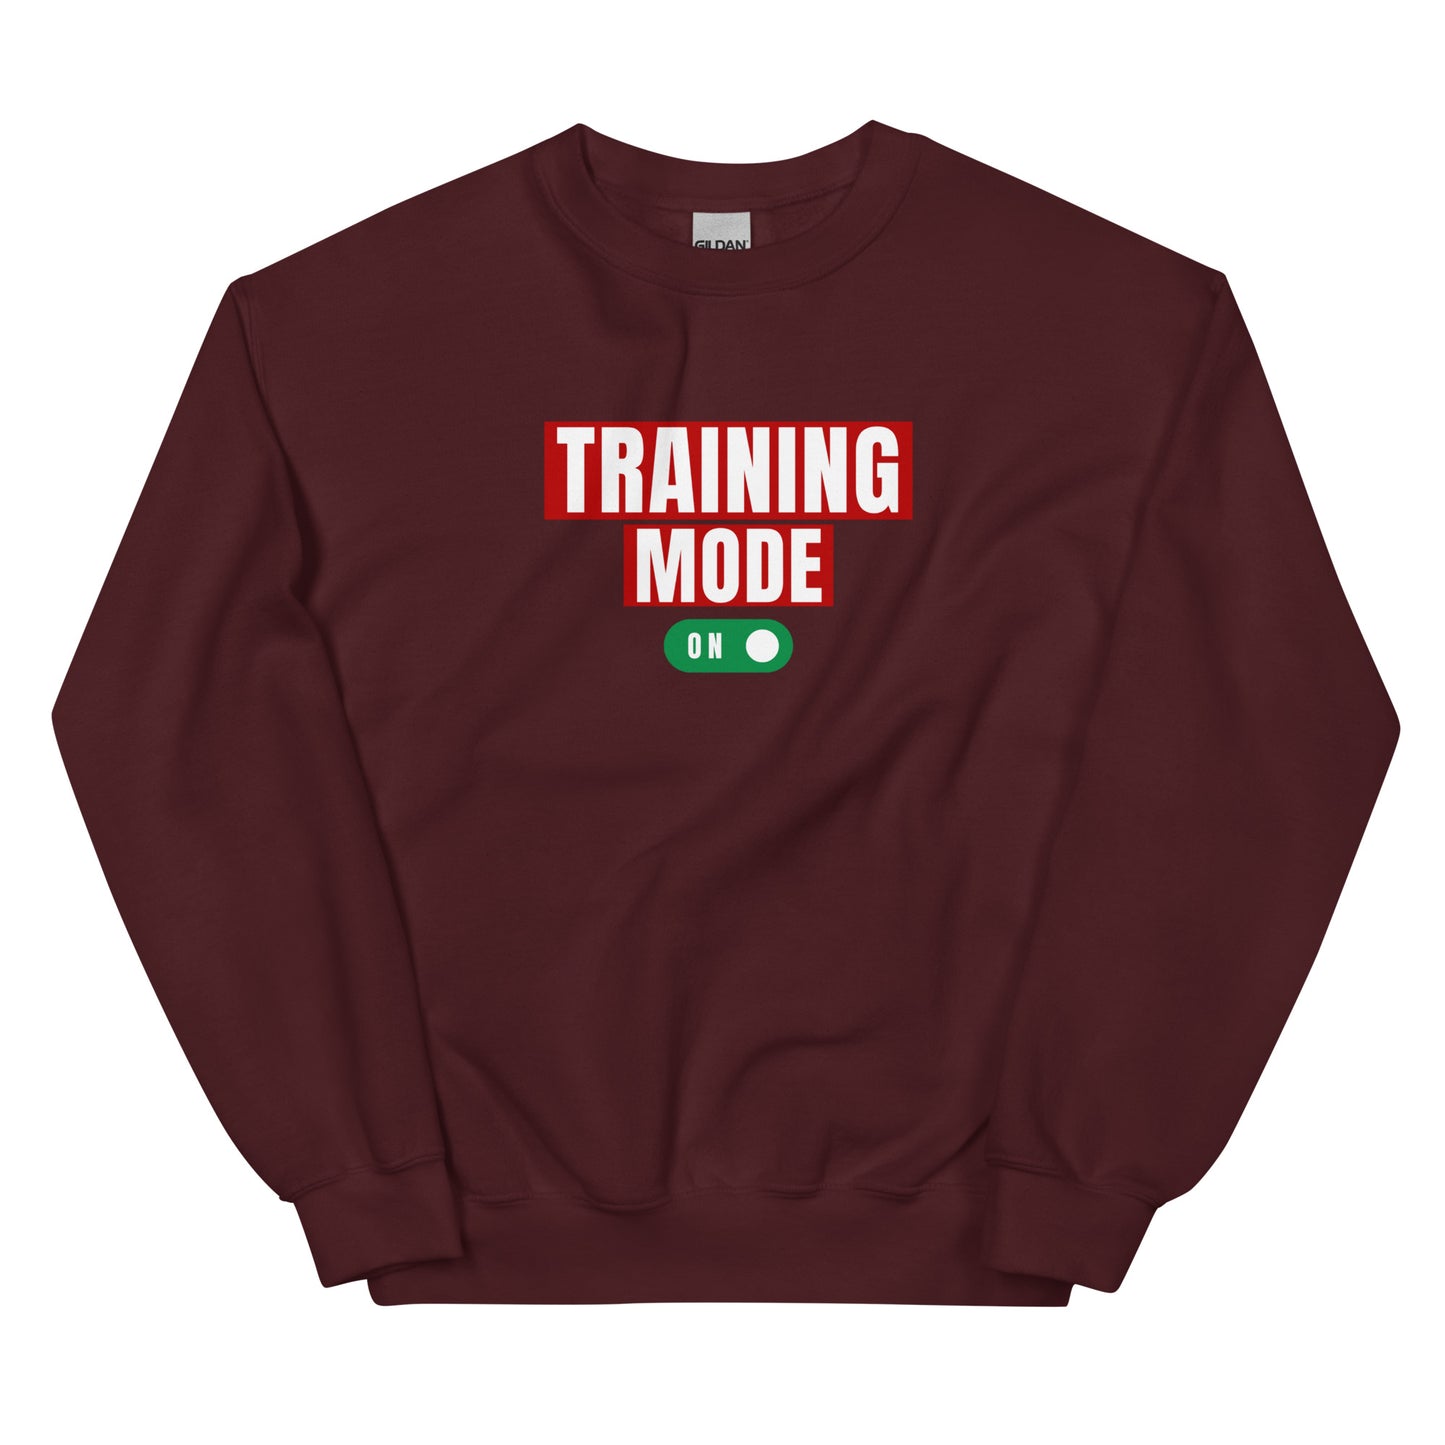 Training mode on German Shepherd dog lovers and owners sweatshirt, red color - GSD Colony